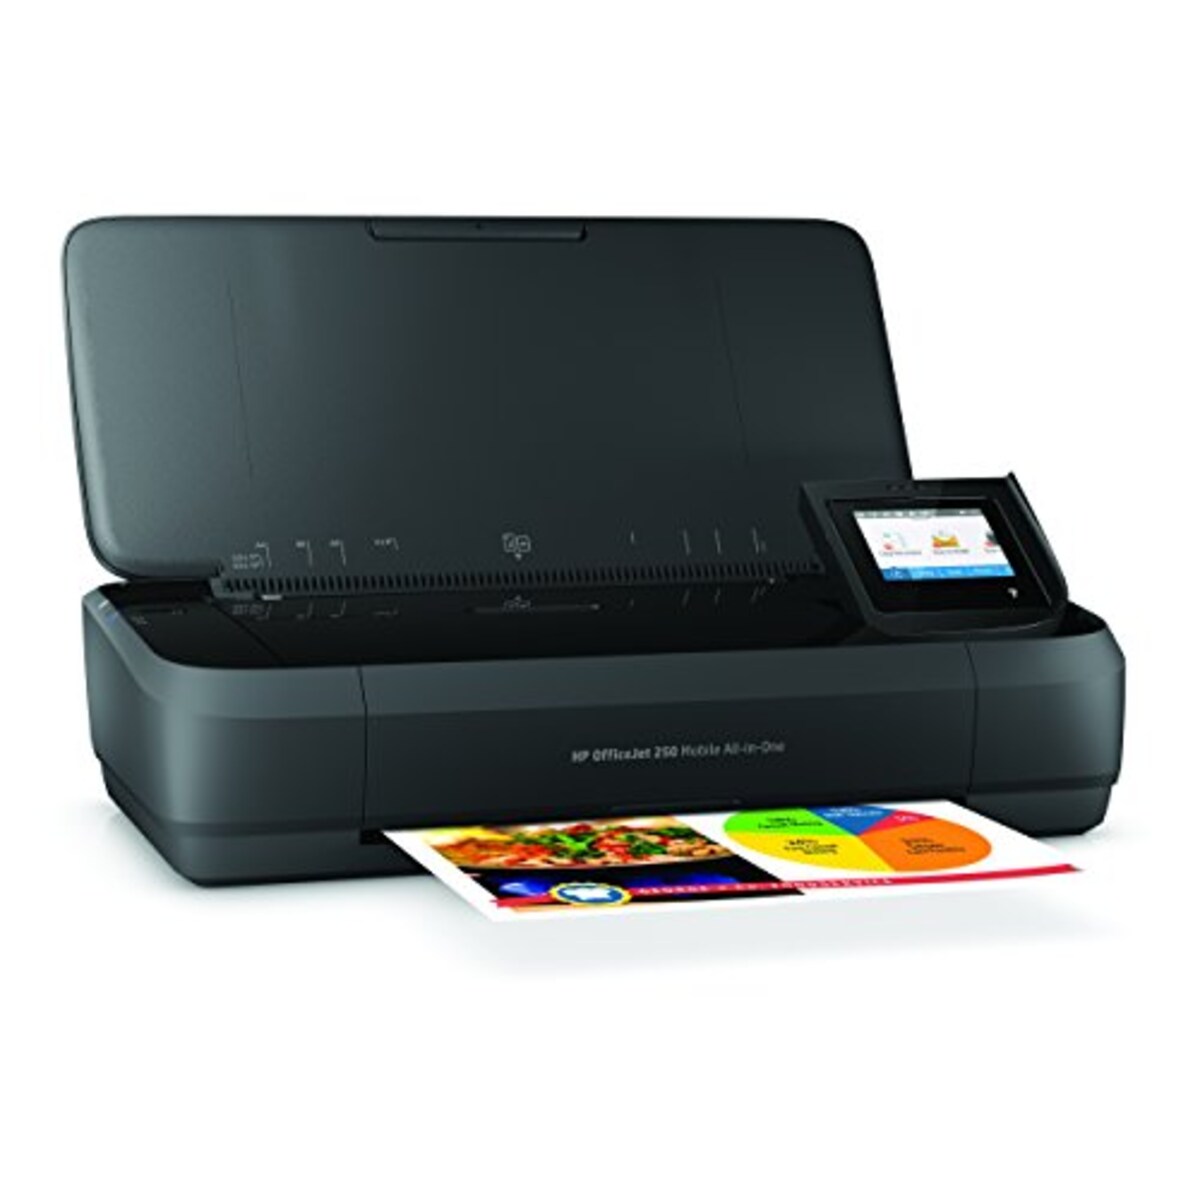 OfficeJet 250 Mobile AiO